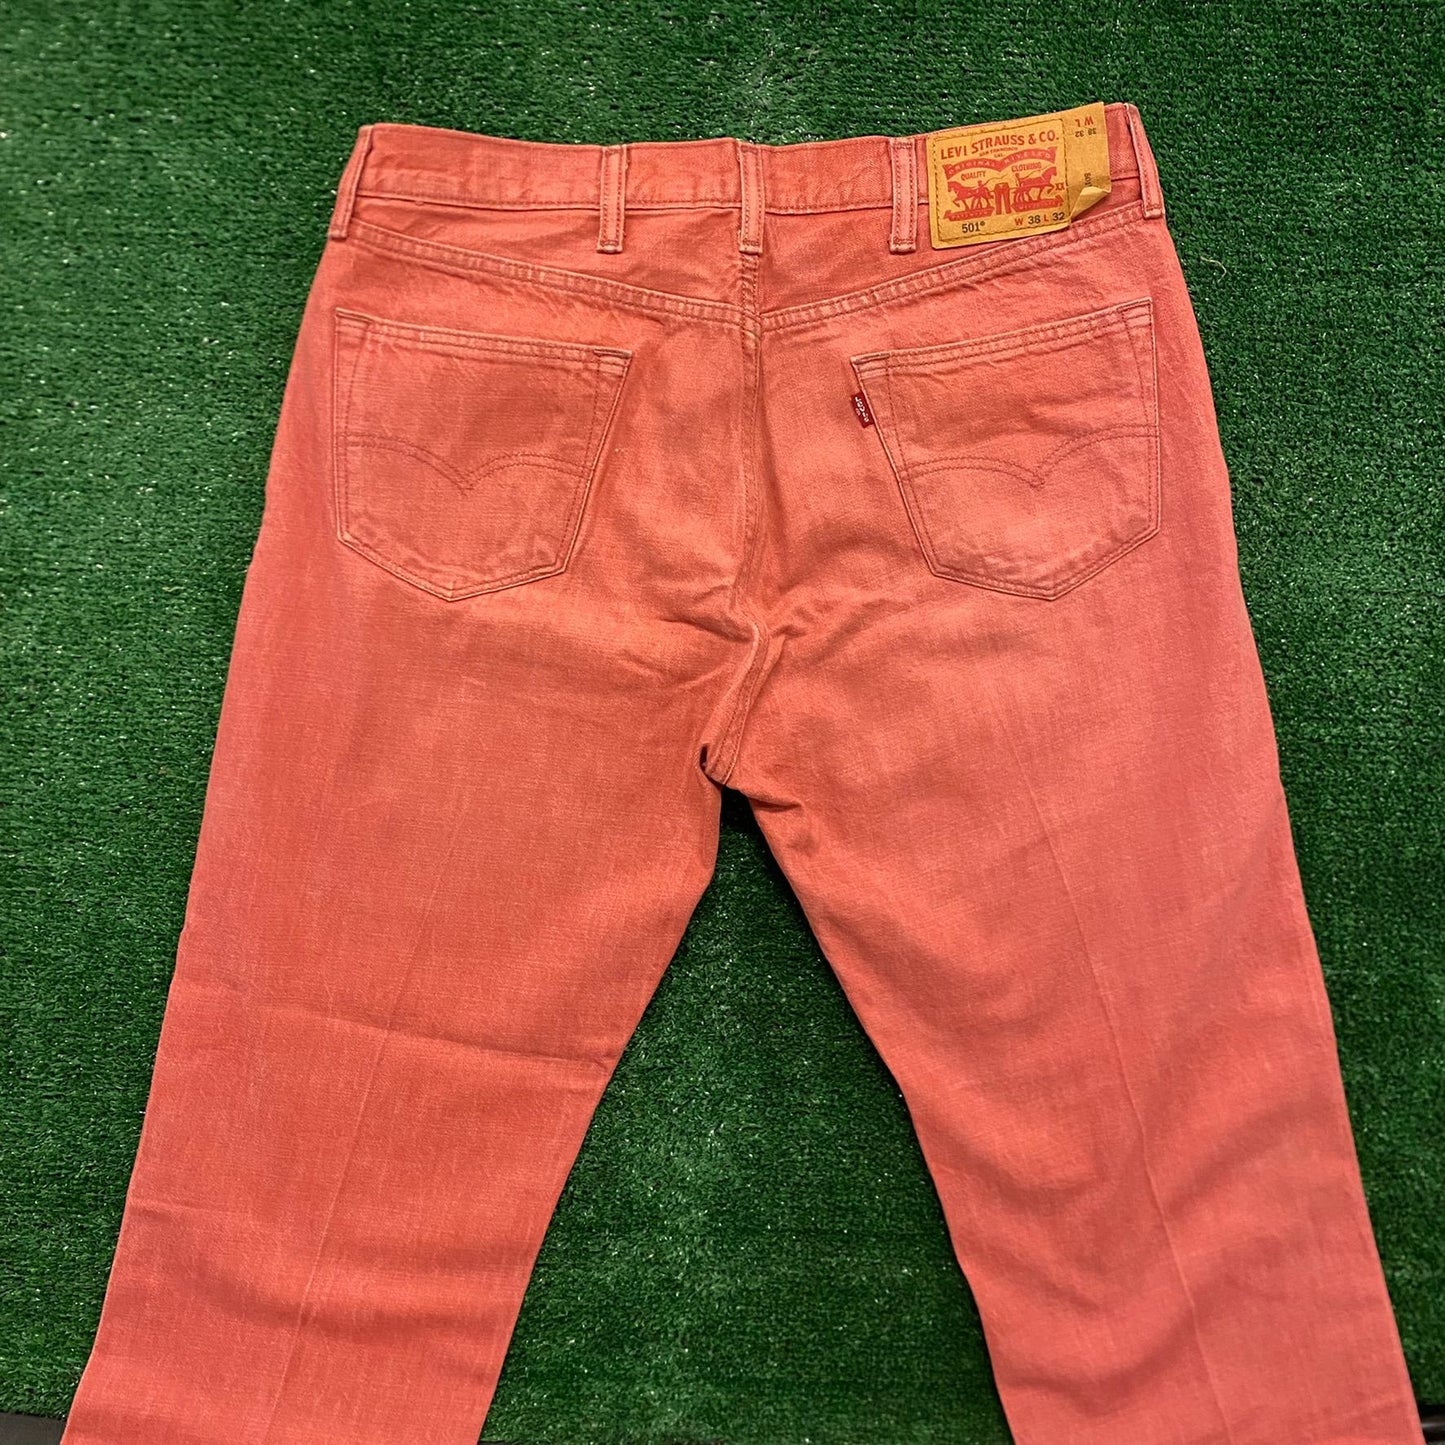 Levi's 501 Faded Red Straight Fit Vintage Denim Jeans Pants